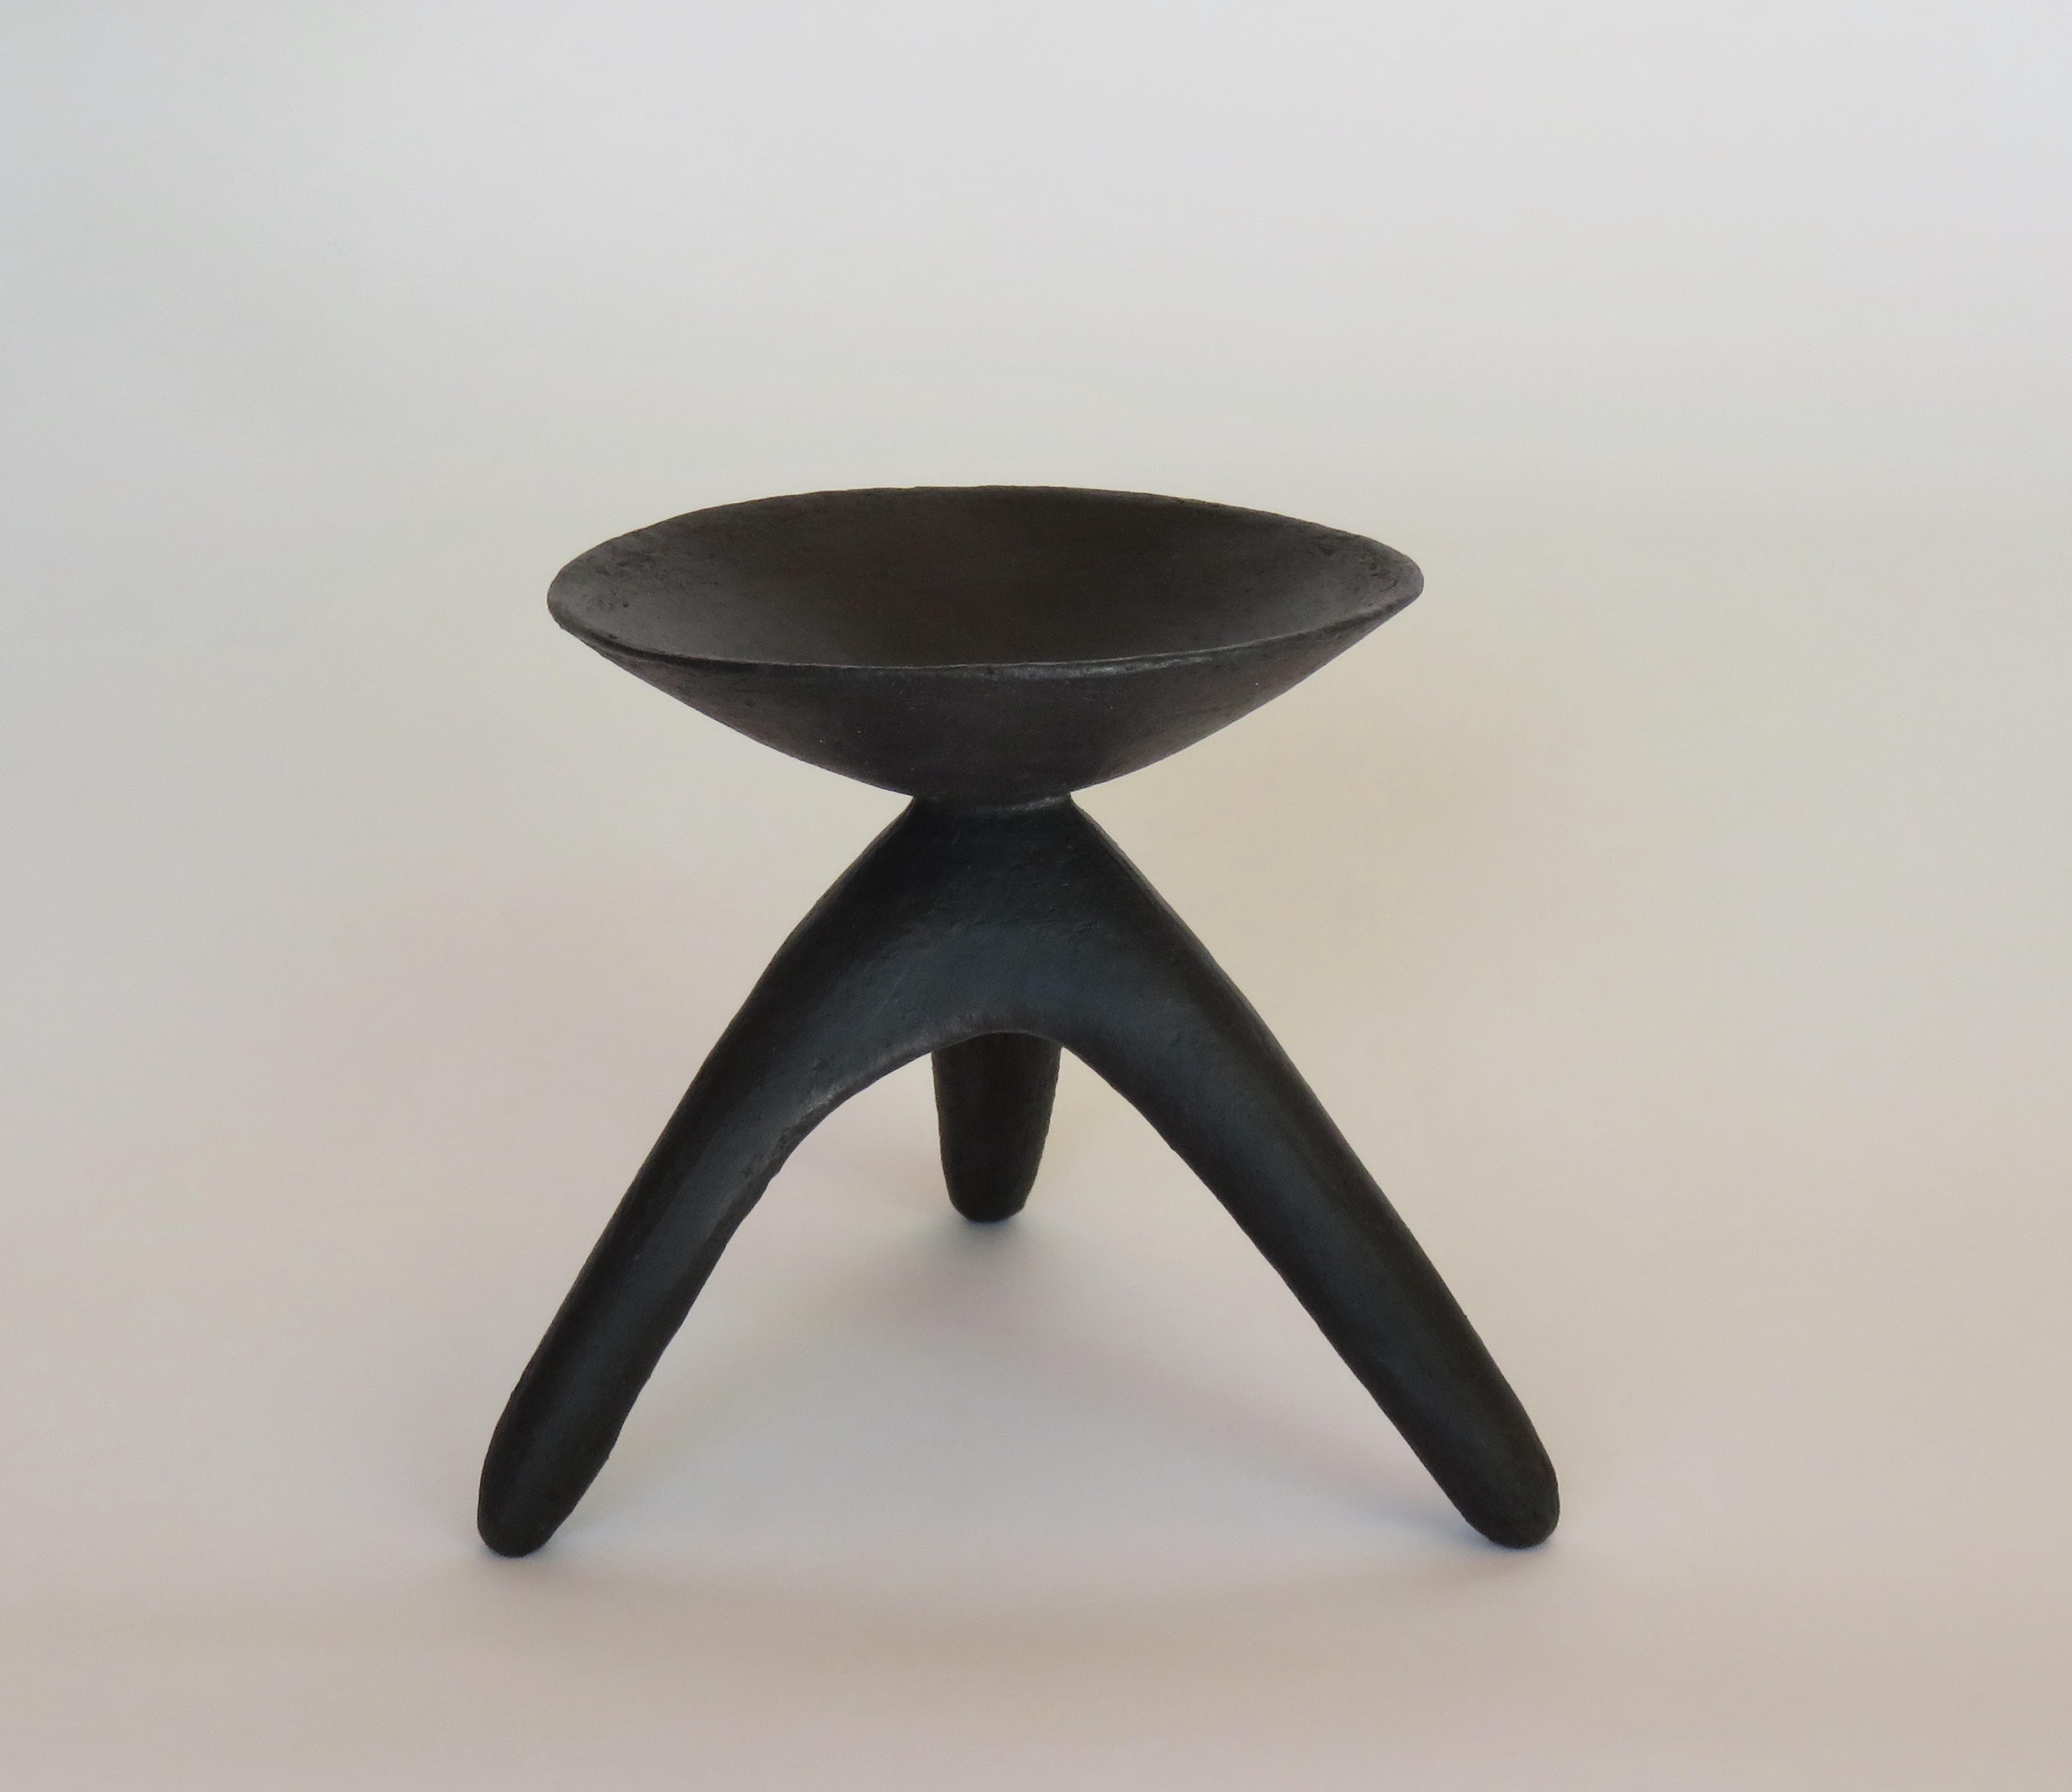 A Hand Formed Chalice on Tripod Legs, one in a series of Modern TOTEMS, in matte black, underglazed stoneware.
Each TOTEM is unique and has its own personality consisting of various hand-shaped forms connected together. This one has an open chalice